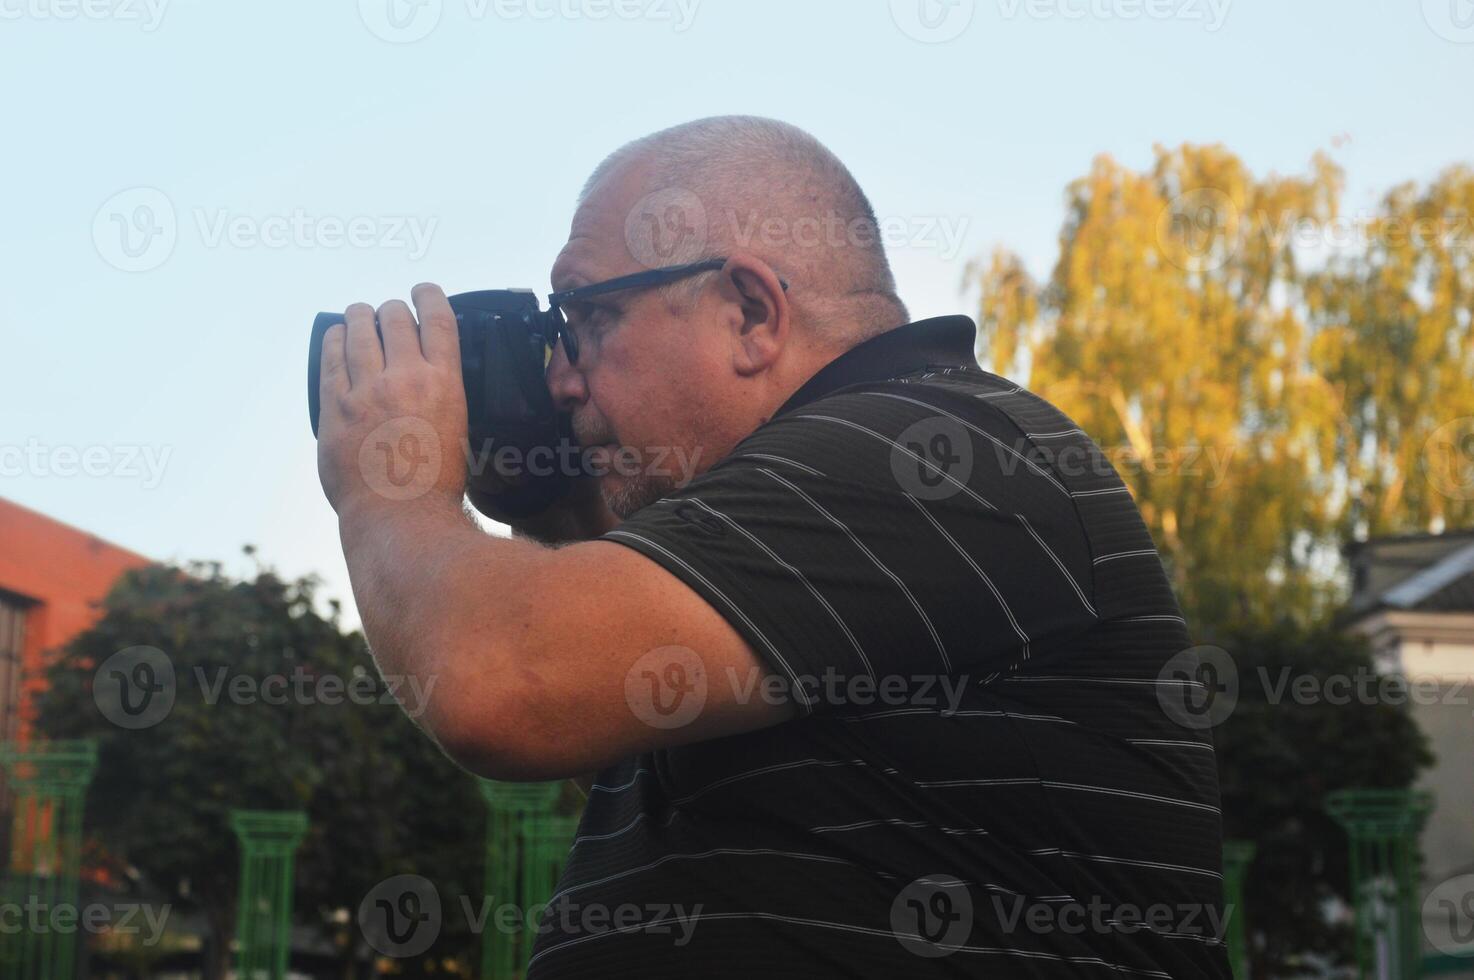 Caucasian man photographer with a modern camera takes photo pictures on a city street.